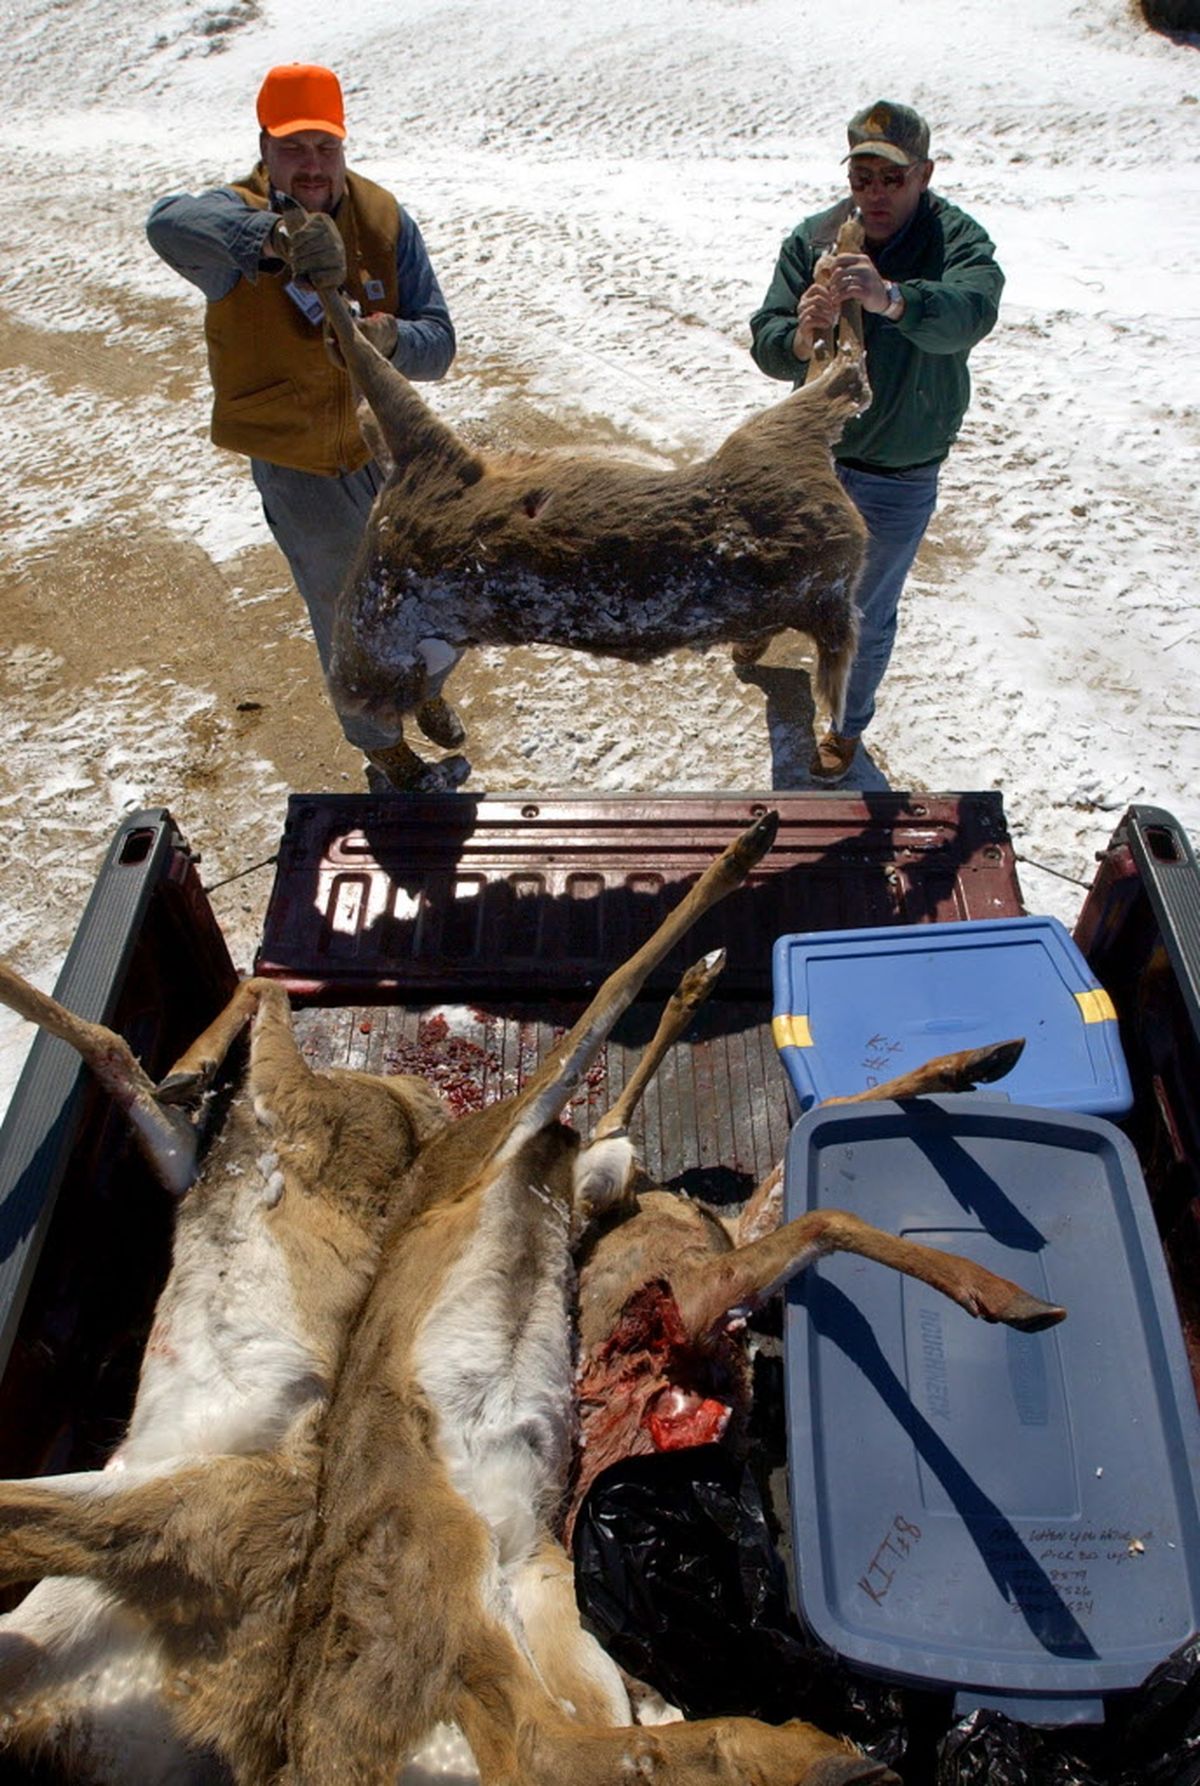 Wisconsin Department of Natural Resources workers load up a deer carcass destined for a landfill near Black Earth, Wis., after the state ordered a special deer hunt in March 2002 to determine how extensive chronic wasting disease was affecting deer in the state. More than a decade later, the disease continues to spread and infect more of the state